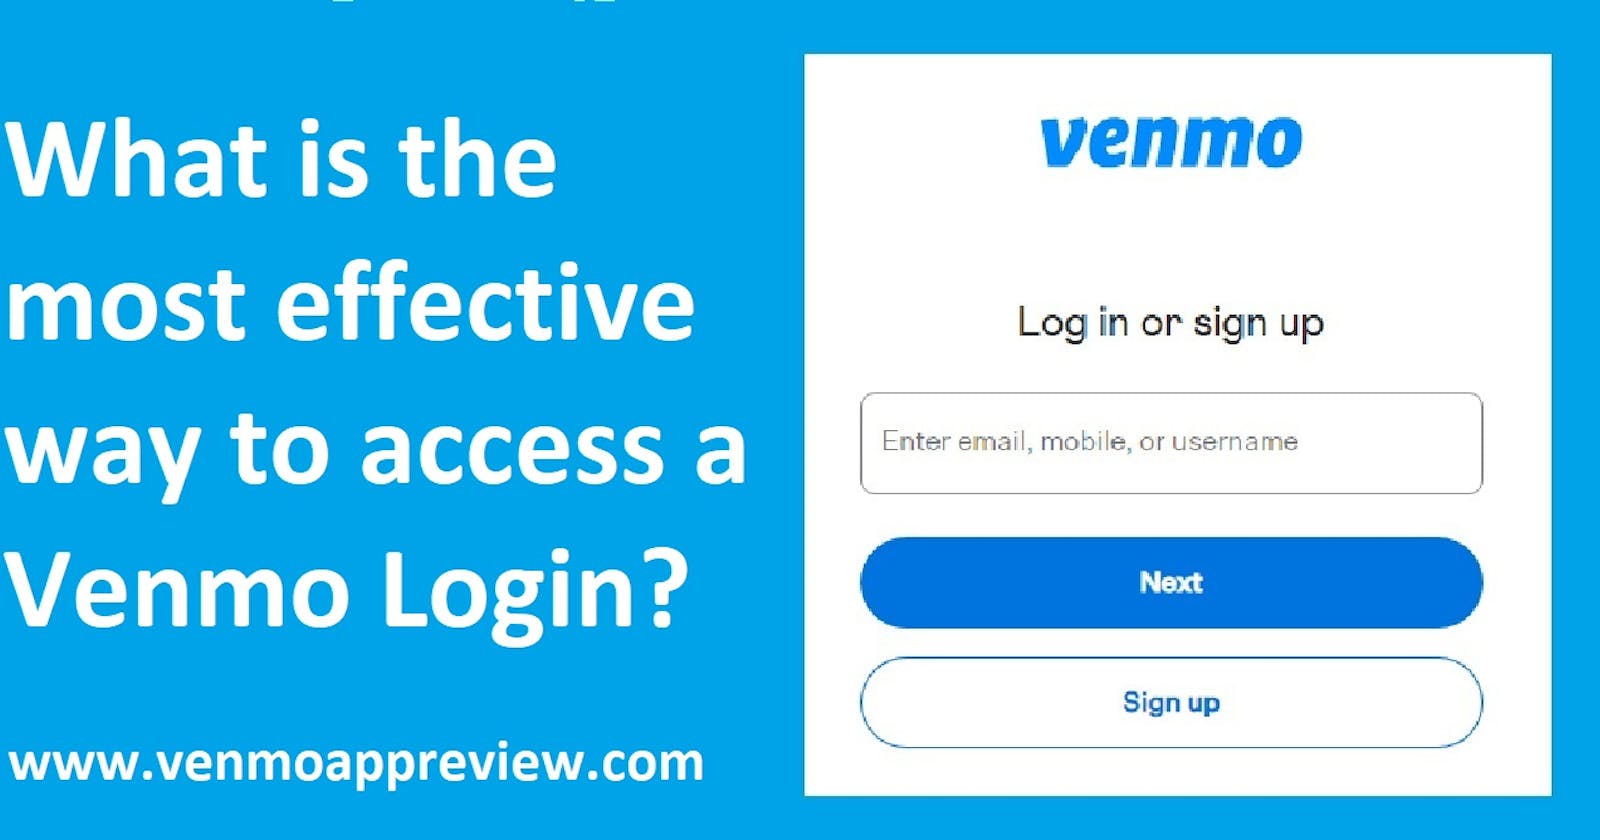 What is the most effective way to access a Venmo Login?